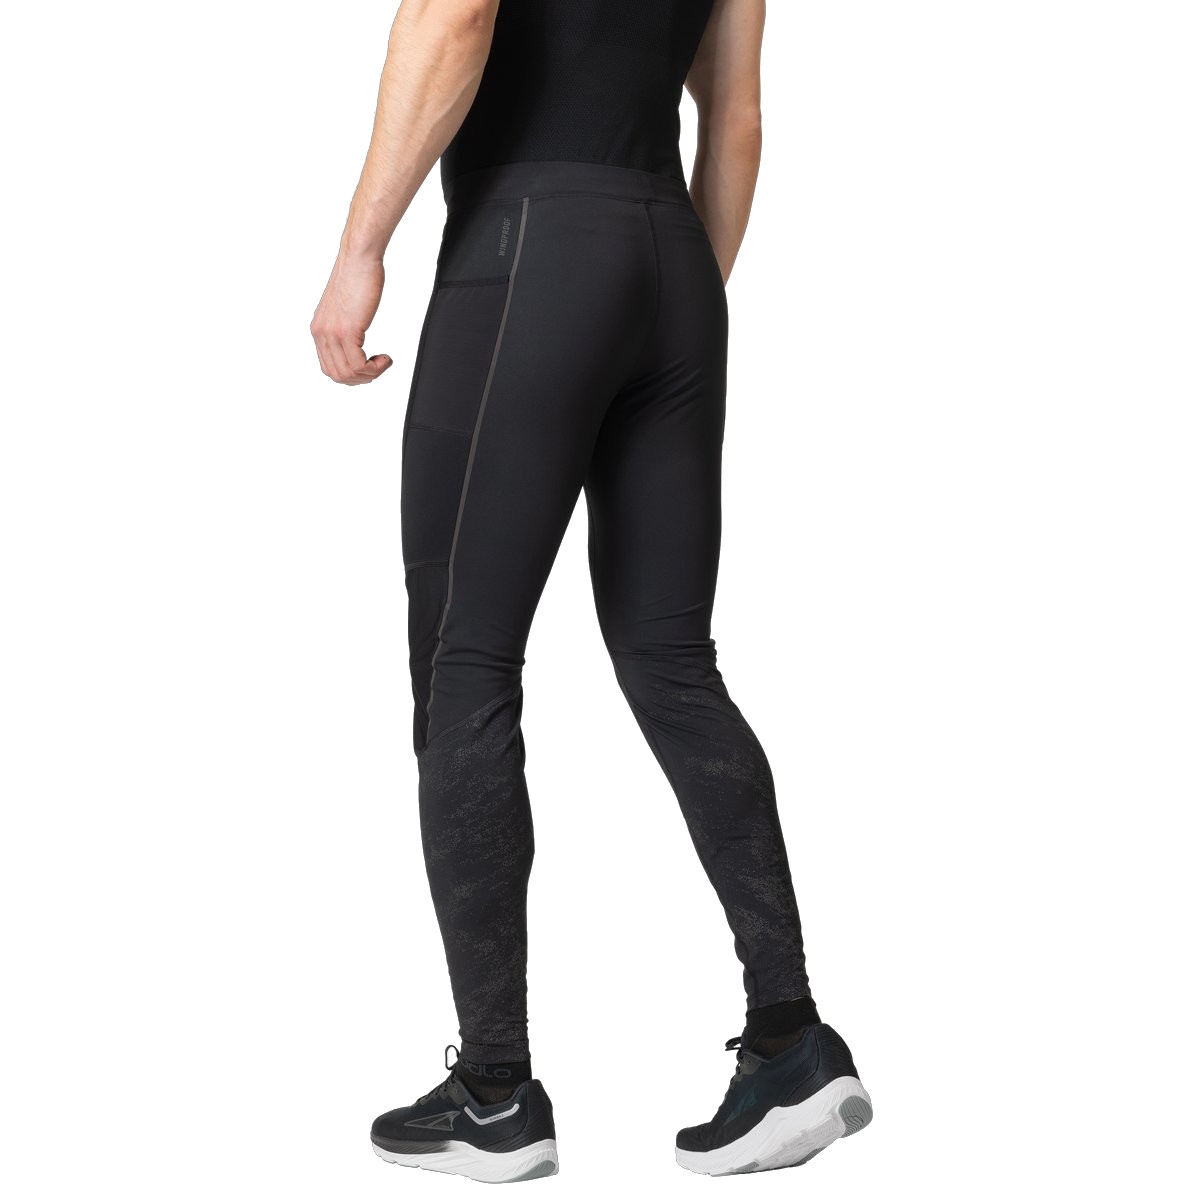  Odlo Men's Essential Run Tights, Black, Small : Clothing,  Shoes & Jewelry